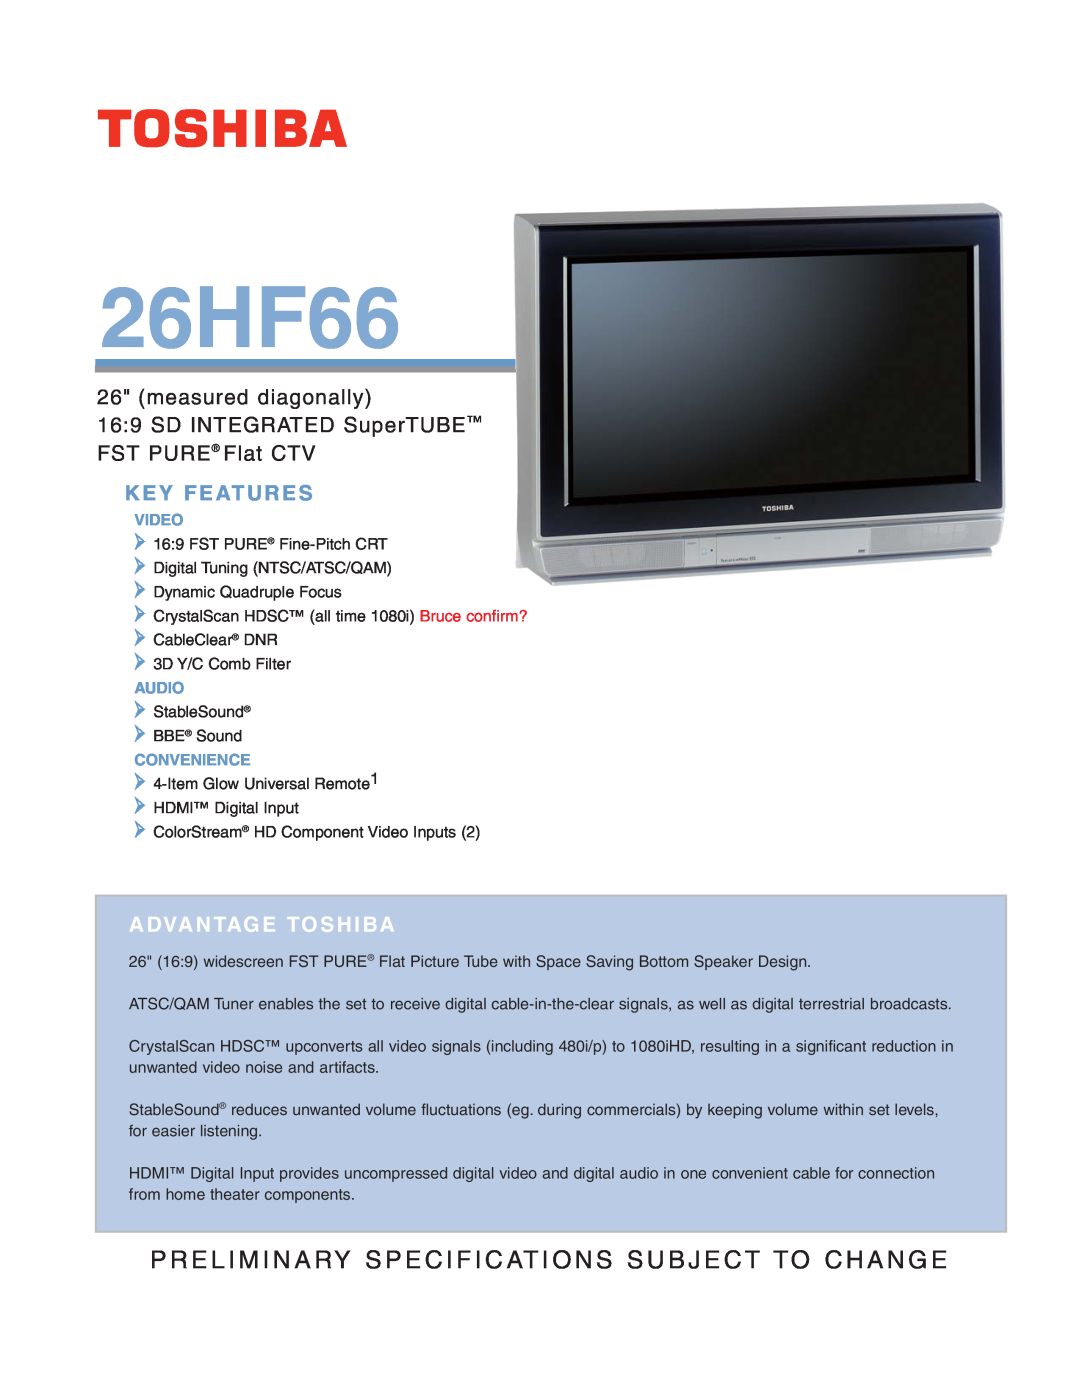 Toshiba specifications Key Features, 26HF66, measured diagonally 169 SD INTEGRATED SuperTUBE FST PURE Flat CTV, Video 